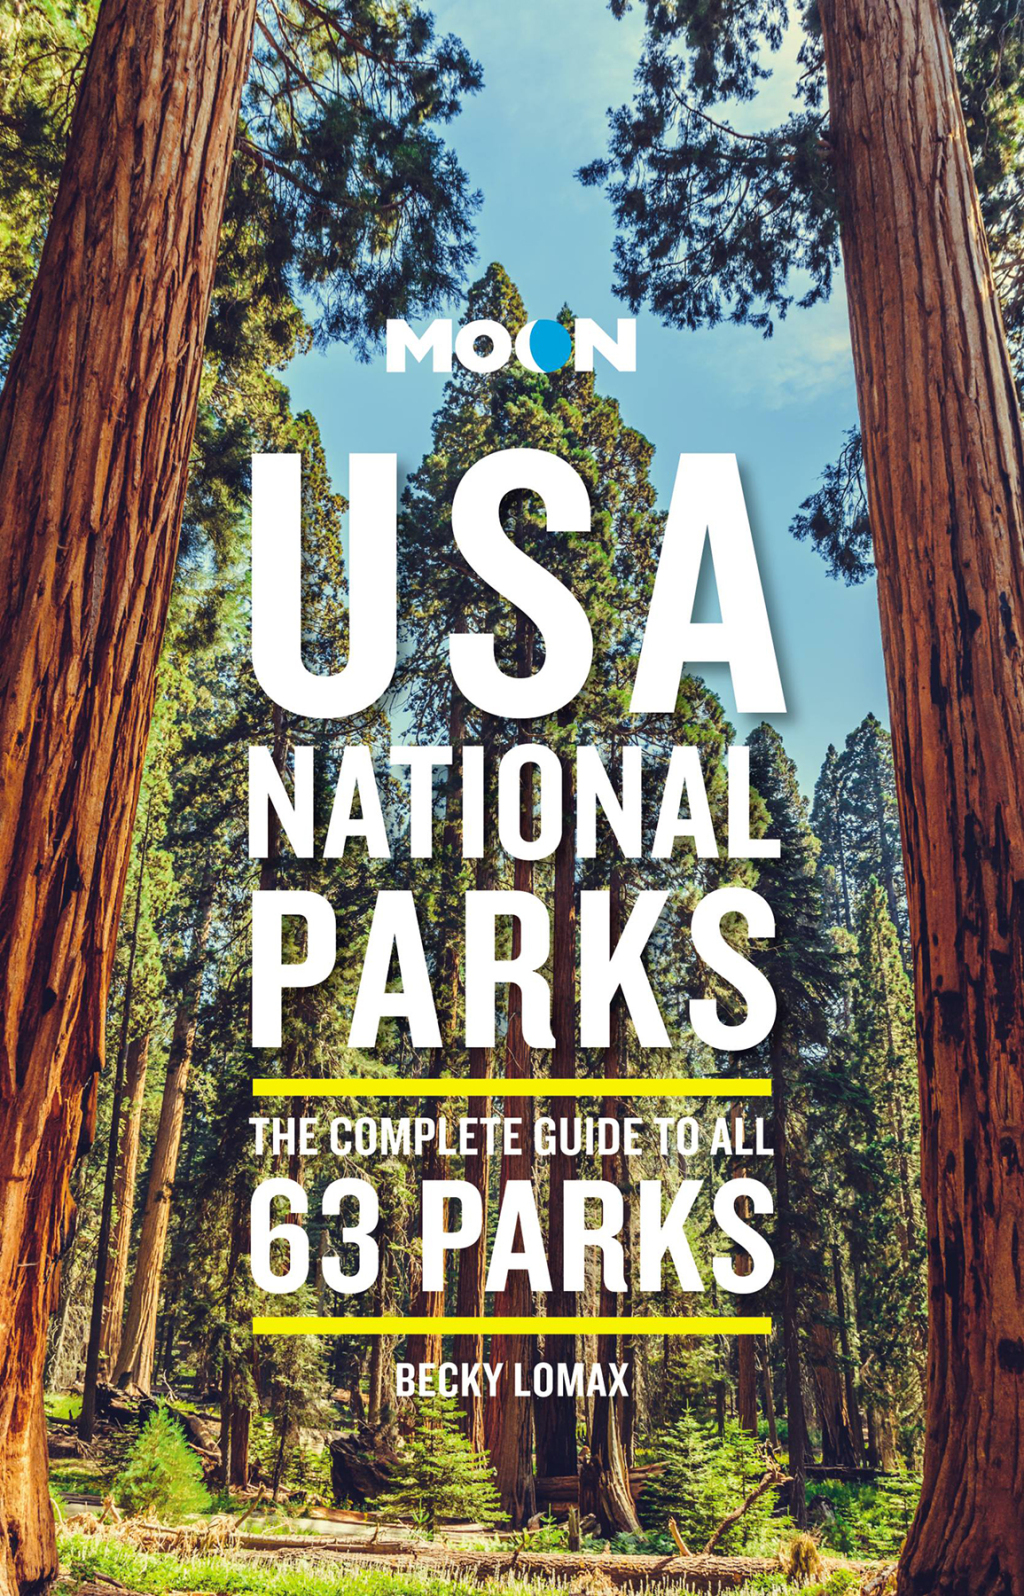 Moon USA National Parks - (Travel Guide) 3rd Edition by Becky Lomax (Paperback)